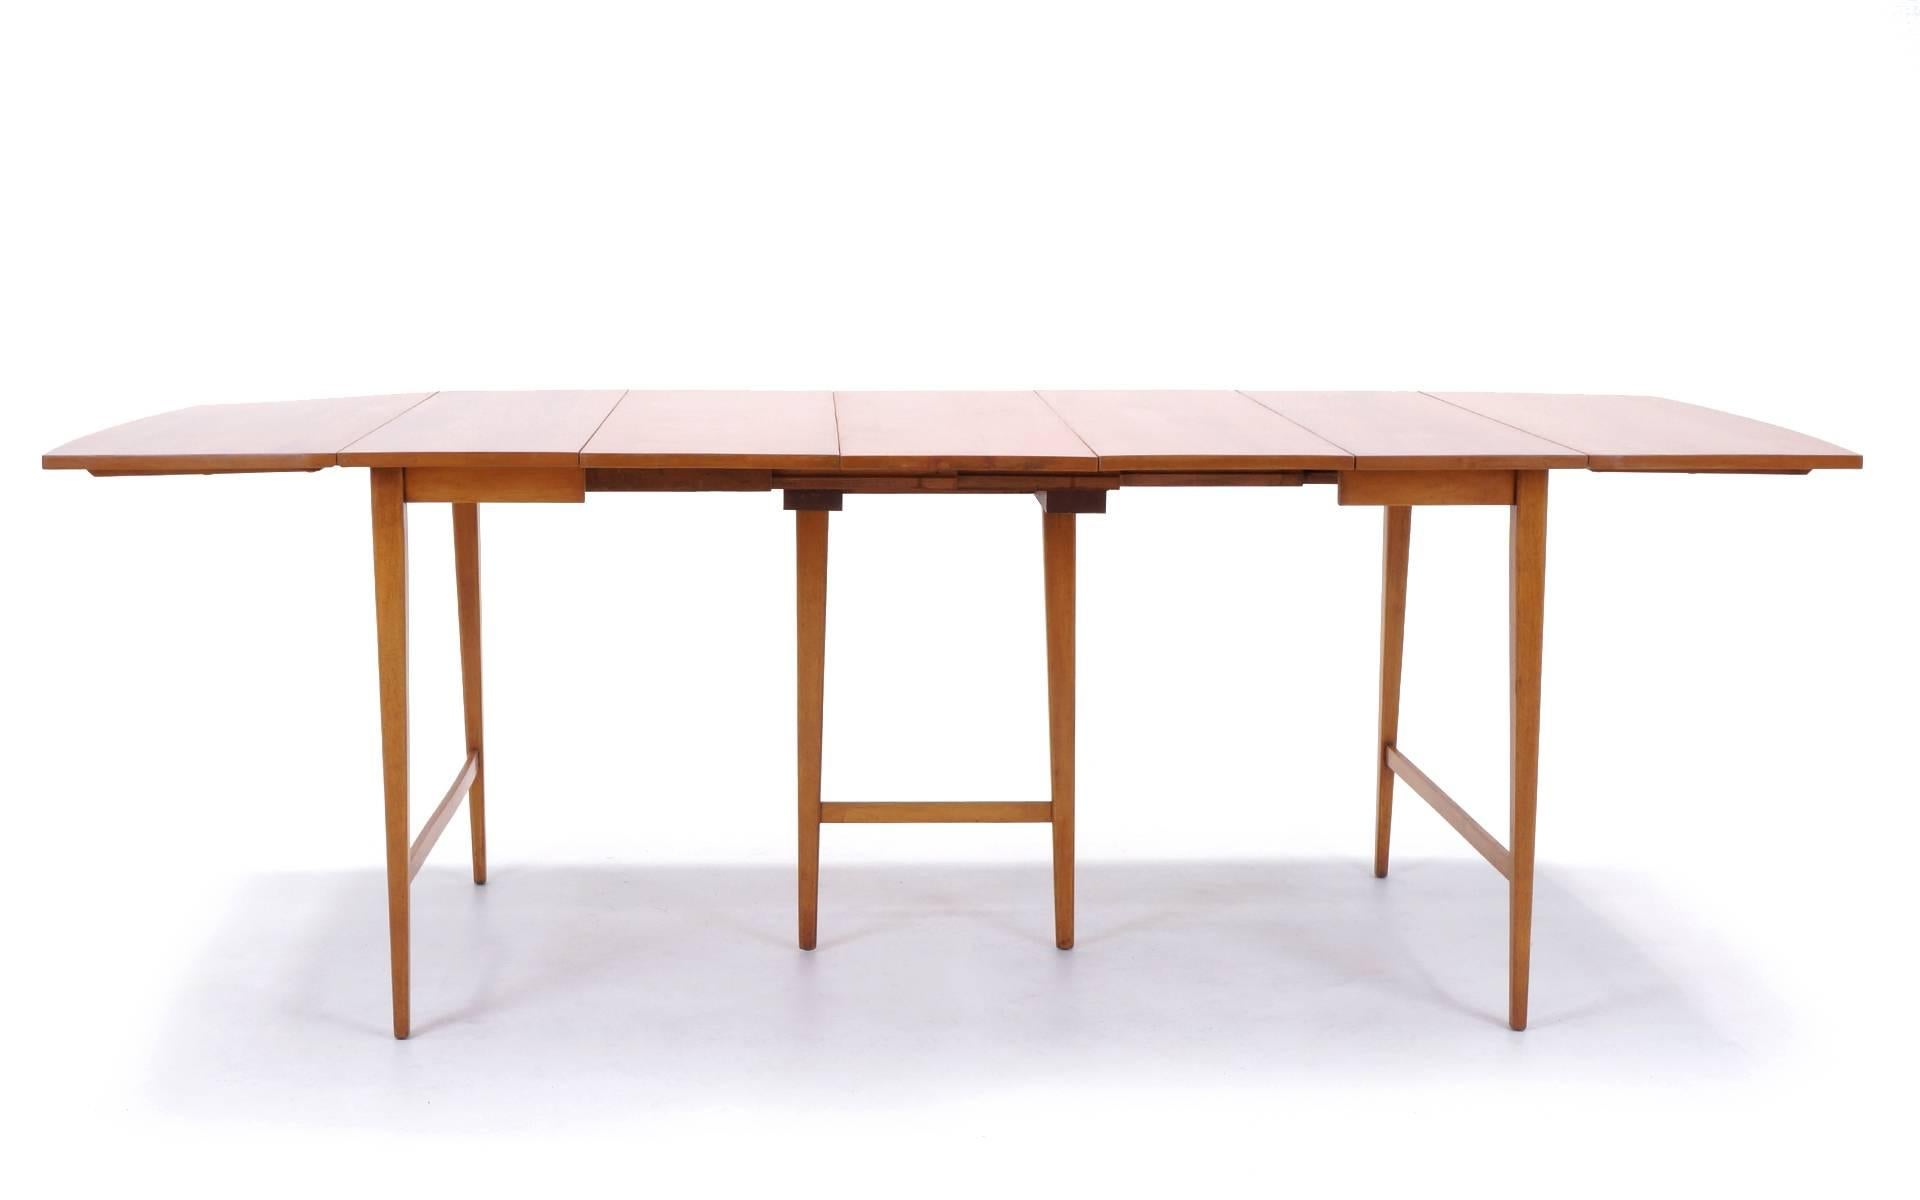 Paul McCobb drop leaf dining table with center legs for Winchendon Modern with three additional leaves. At its smallest, the table is 24 inch by 40 inch table for two. Each drop leaf is 15 inches so it extends to 39 inches with one leaf up and 54